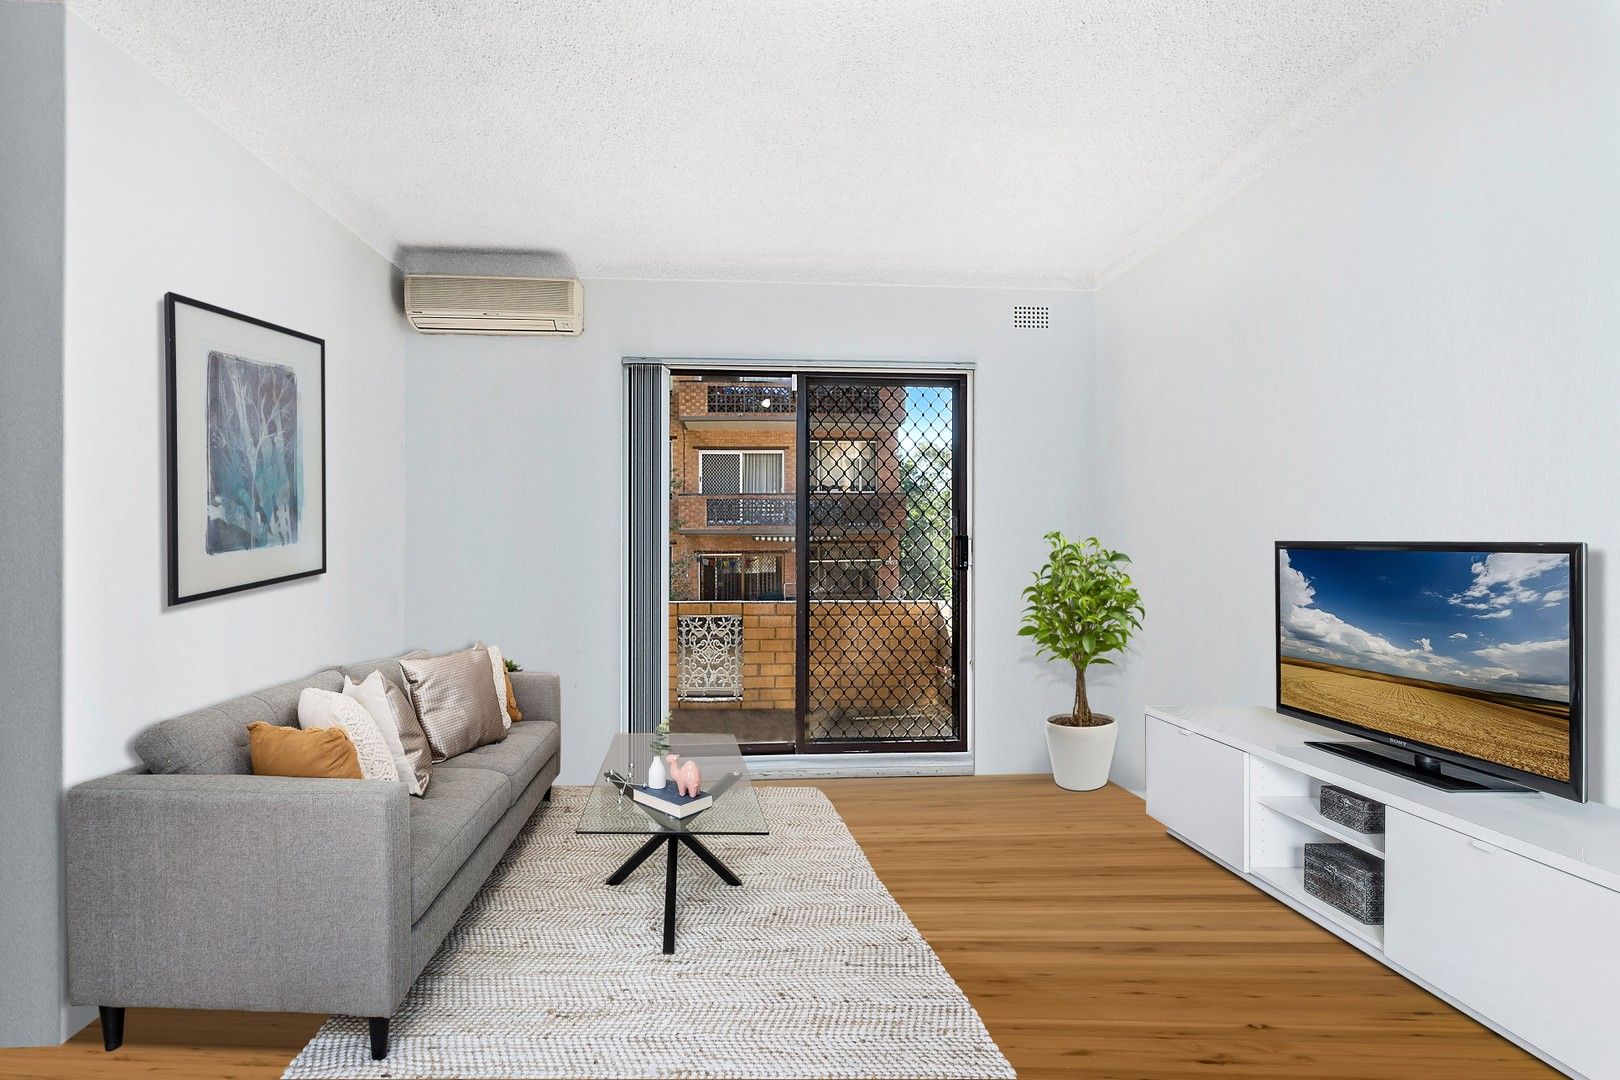 9/22 Macquarie Place, Mortdale NSW 2223, Image 0